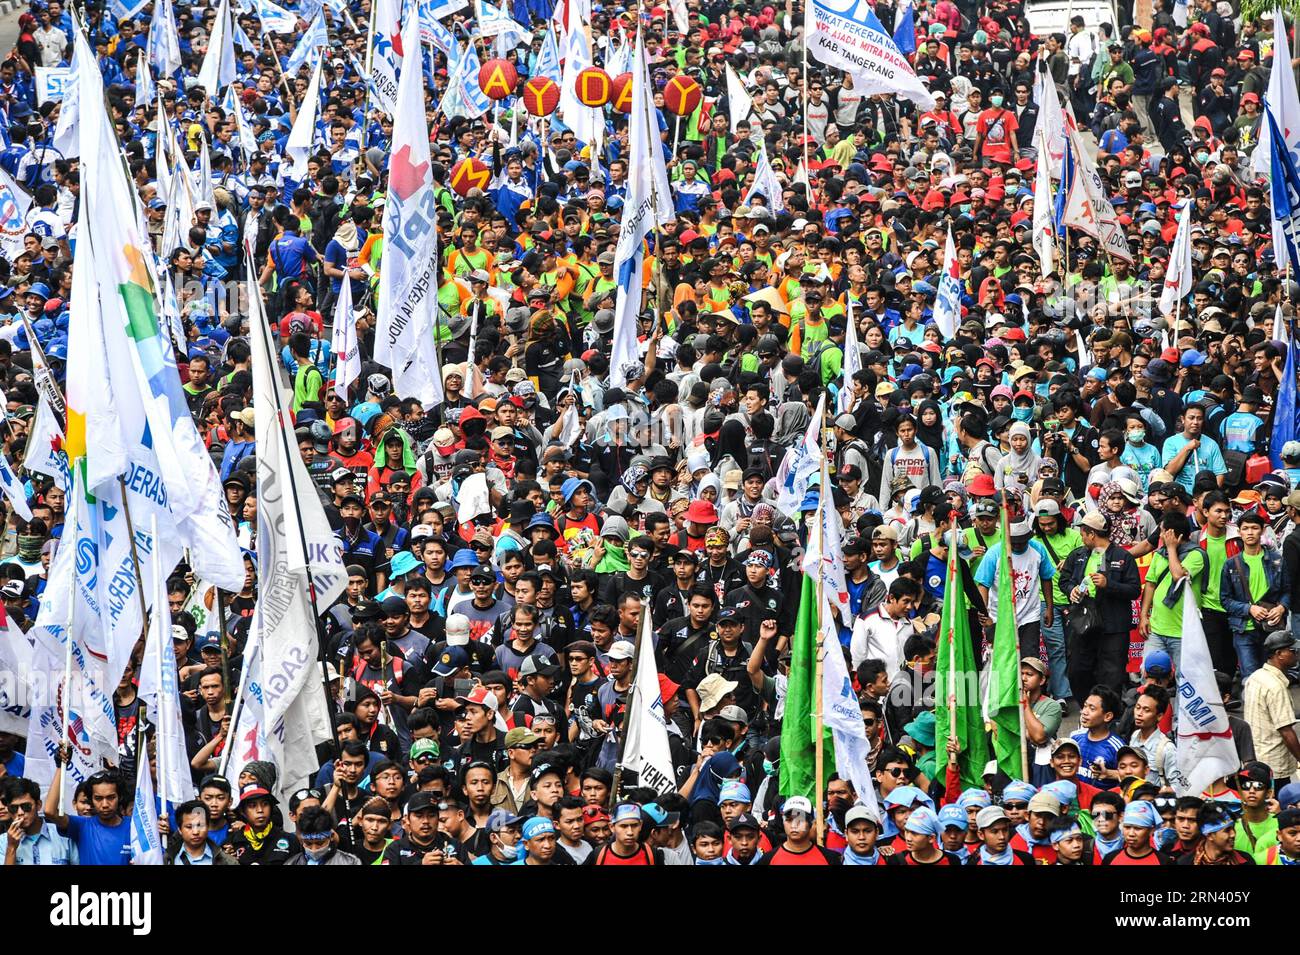 (150501) -- JAKARTA, May 1, 2015 -- Workers march on the Thamrin street during a celebration marking International Labor Day in Jakarta, Indonesia, May 1, 2015. More than a hundred thousand of Indonesian workers gather at the main street in Jakarta and parade to the President Palace to celebrate International Labor Day. ) INDONESIA-JAKARTA-INTERNATIONAL LABOR DAY VerixSanovri PUBLICATIONxNOTxINxCHN   Jakarta May 1 2015 Workers March ON The Thamrin Street during a Celebration marking International Laboratory Day in Jakarta Indonesia May 1 2015 More than a Hundred Thousand of Indonesian Workers Stock Photo